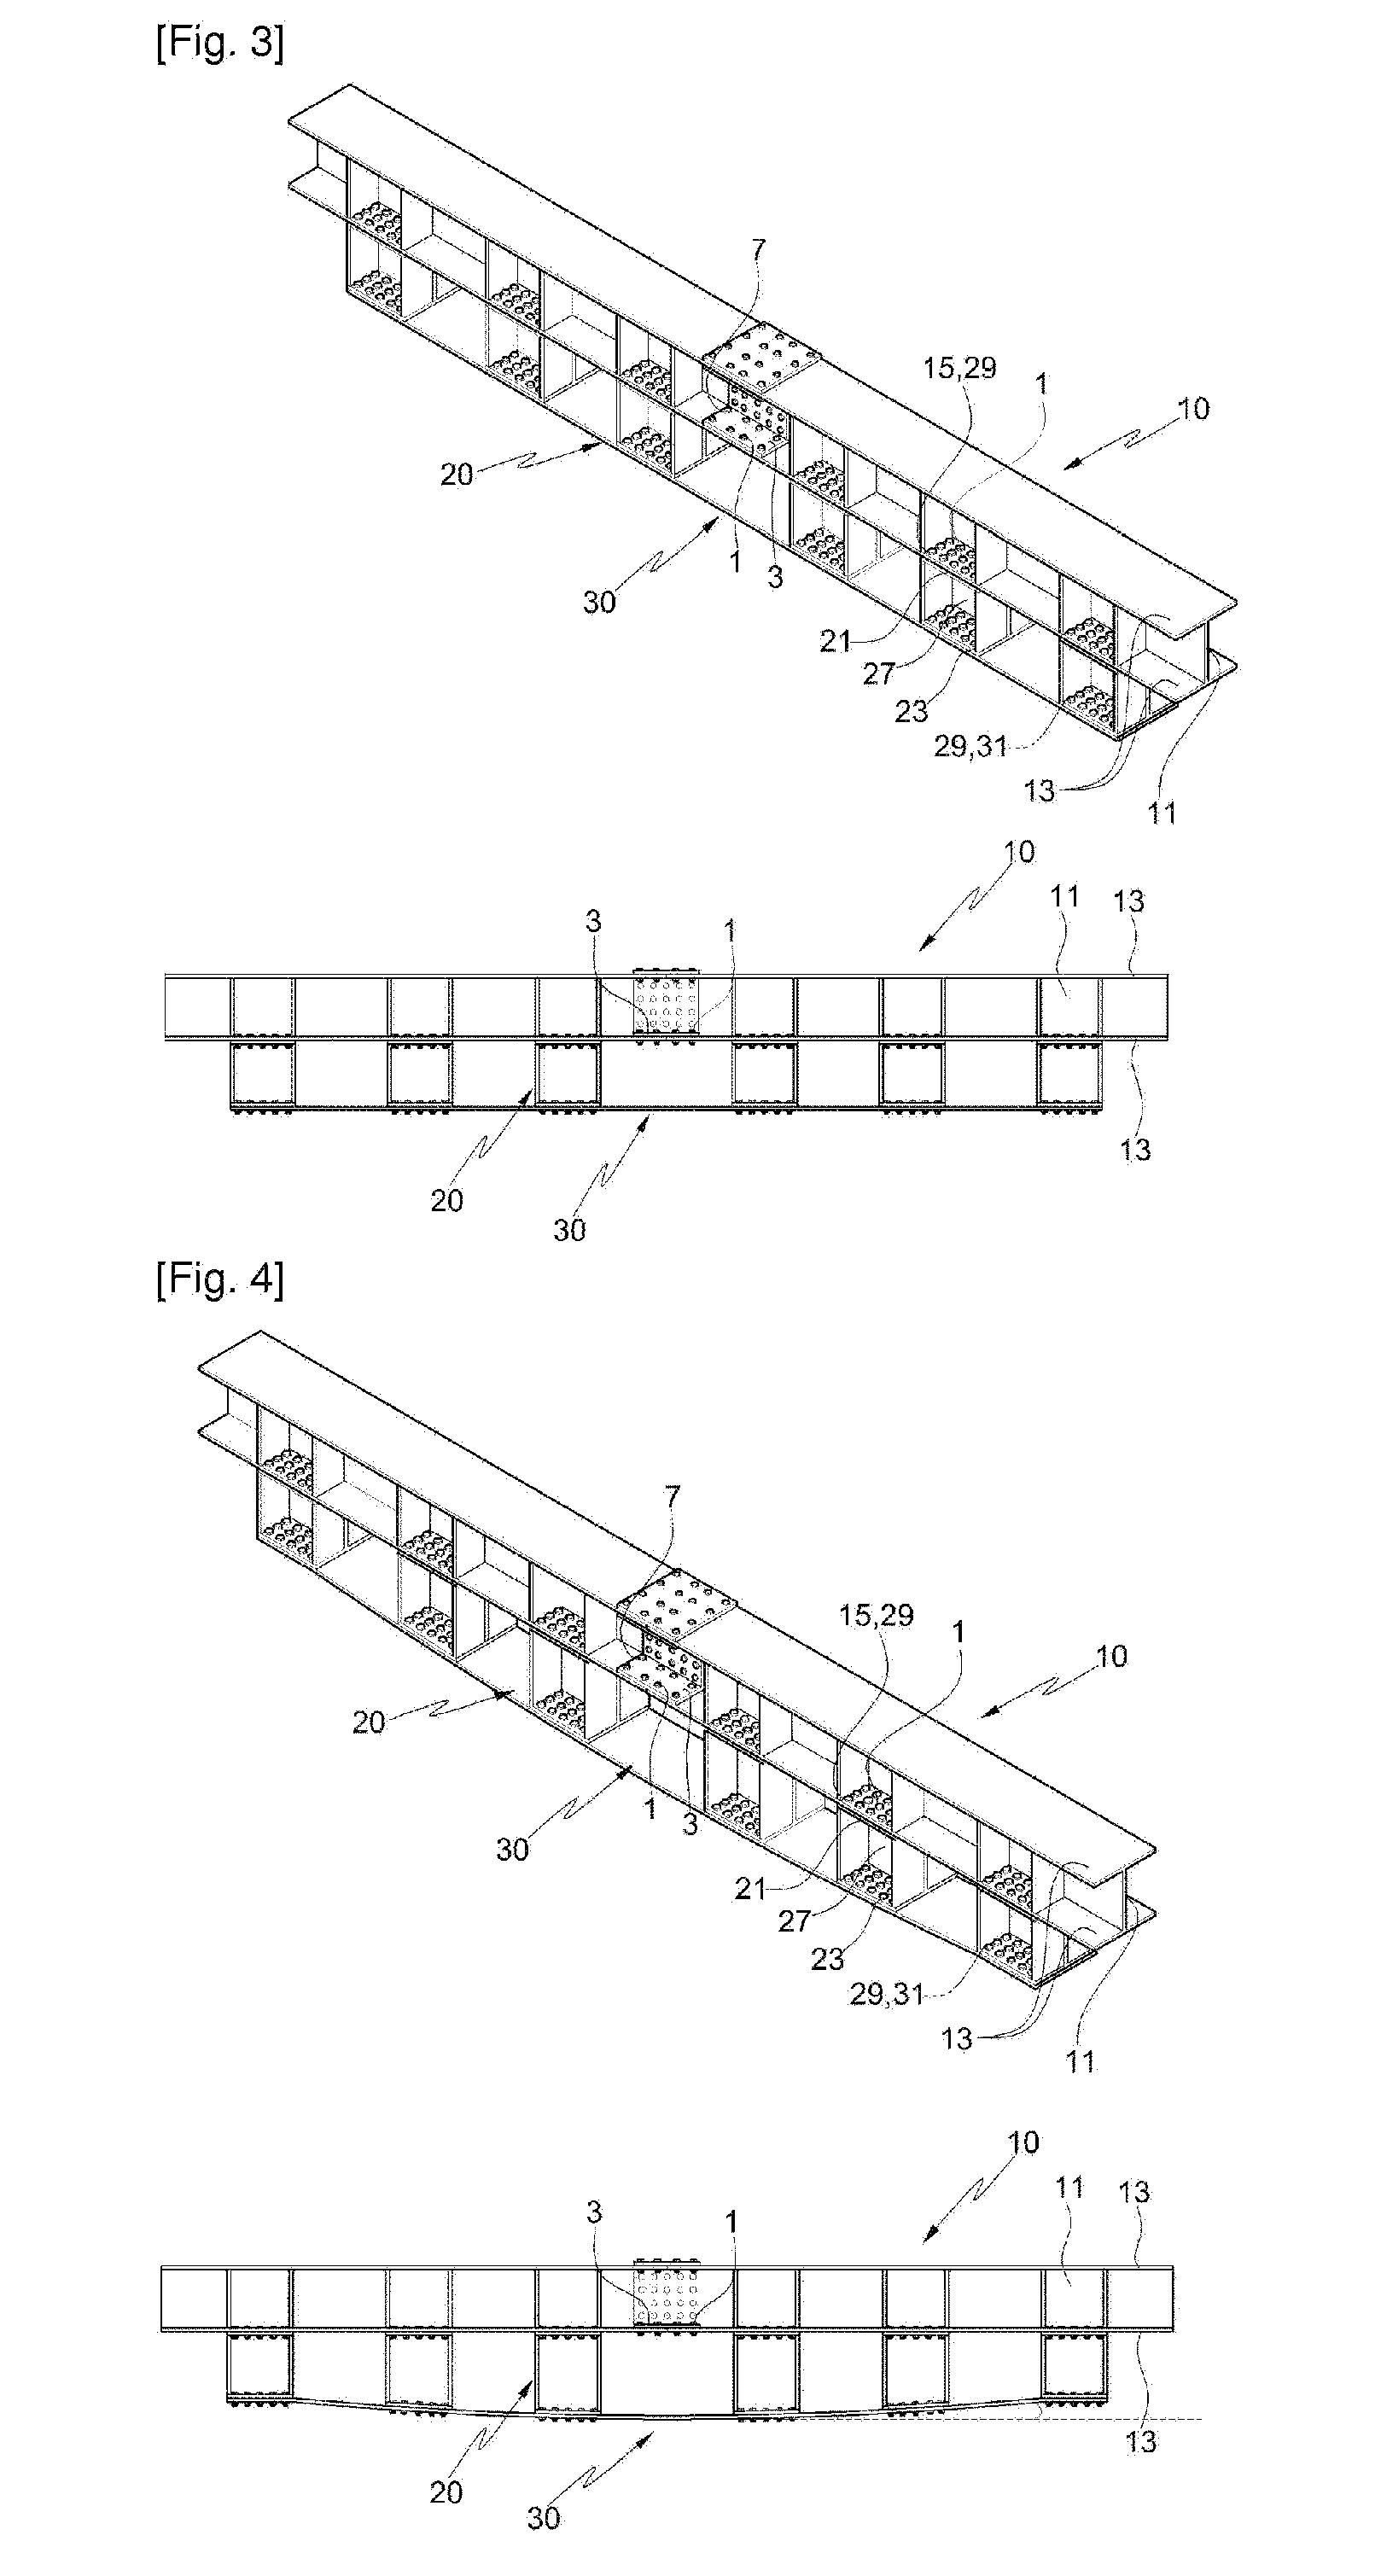 Steel structure including pre-stressing brackets for improving load-carrying capacity and serviceability